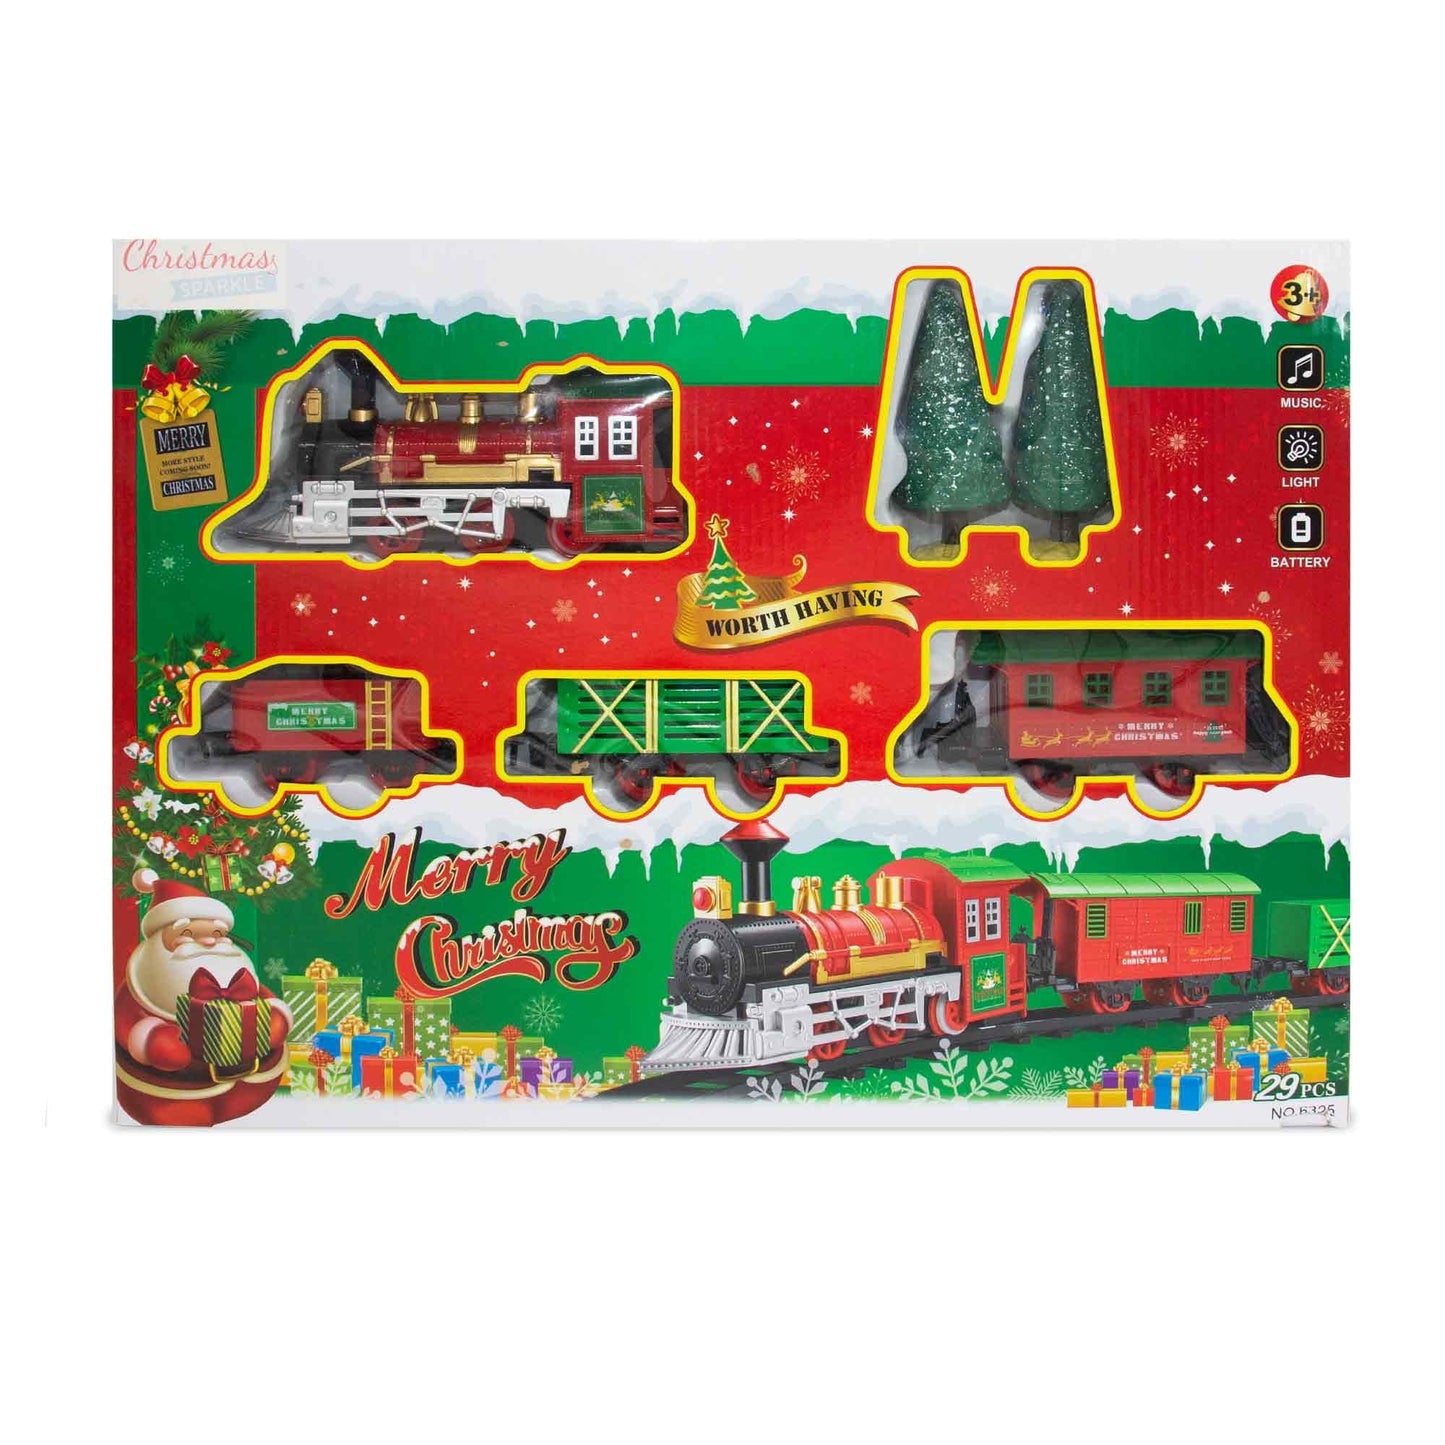 Christmas Sparkle Classic Train 29 piece Set with Lights and Music - Battery Operated